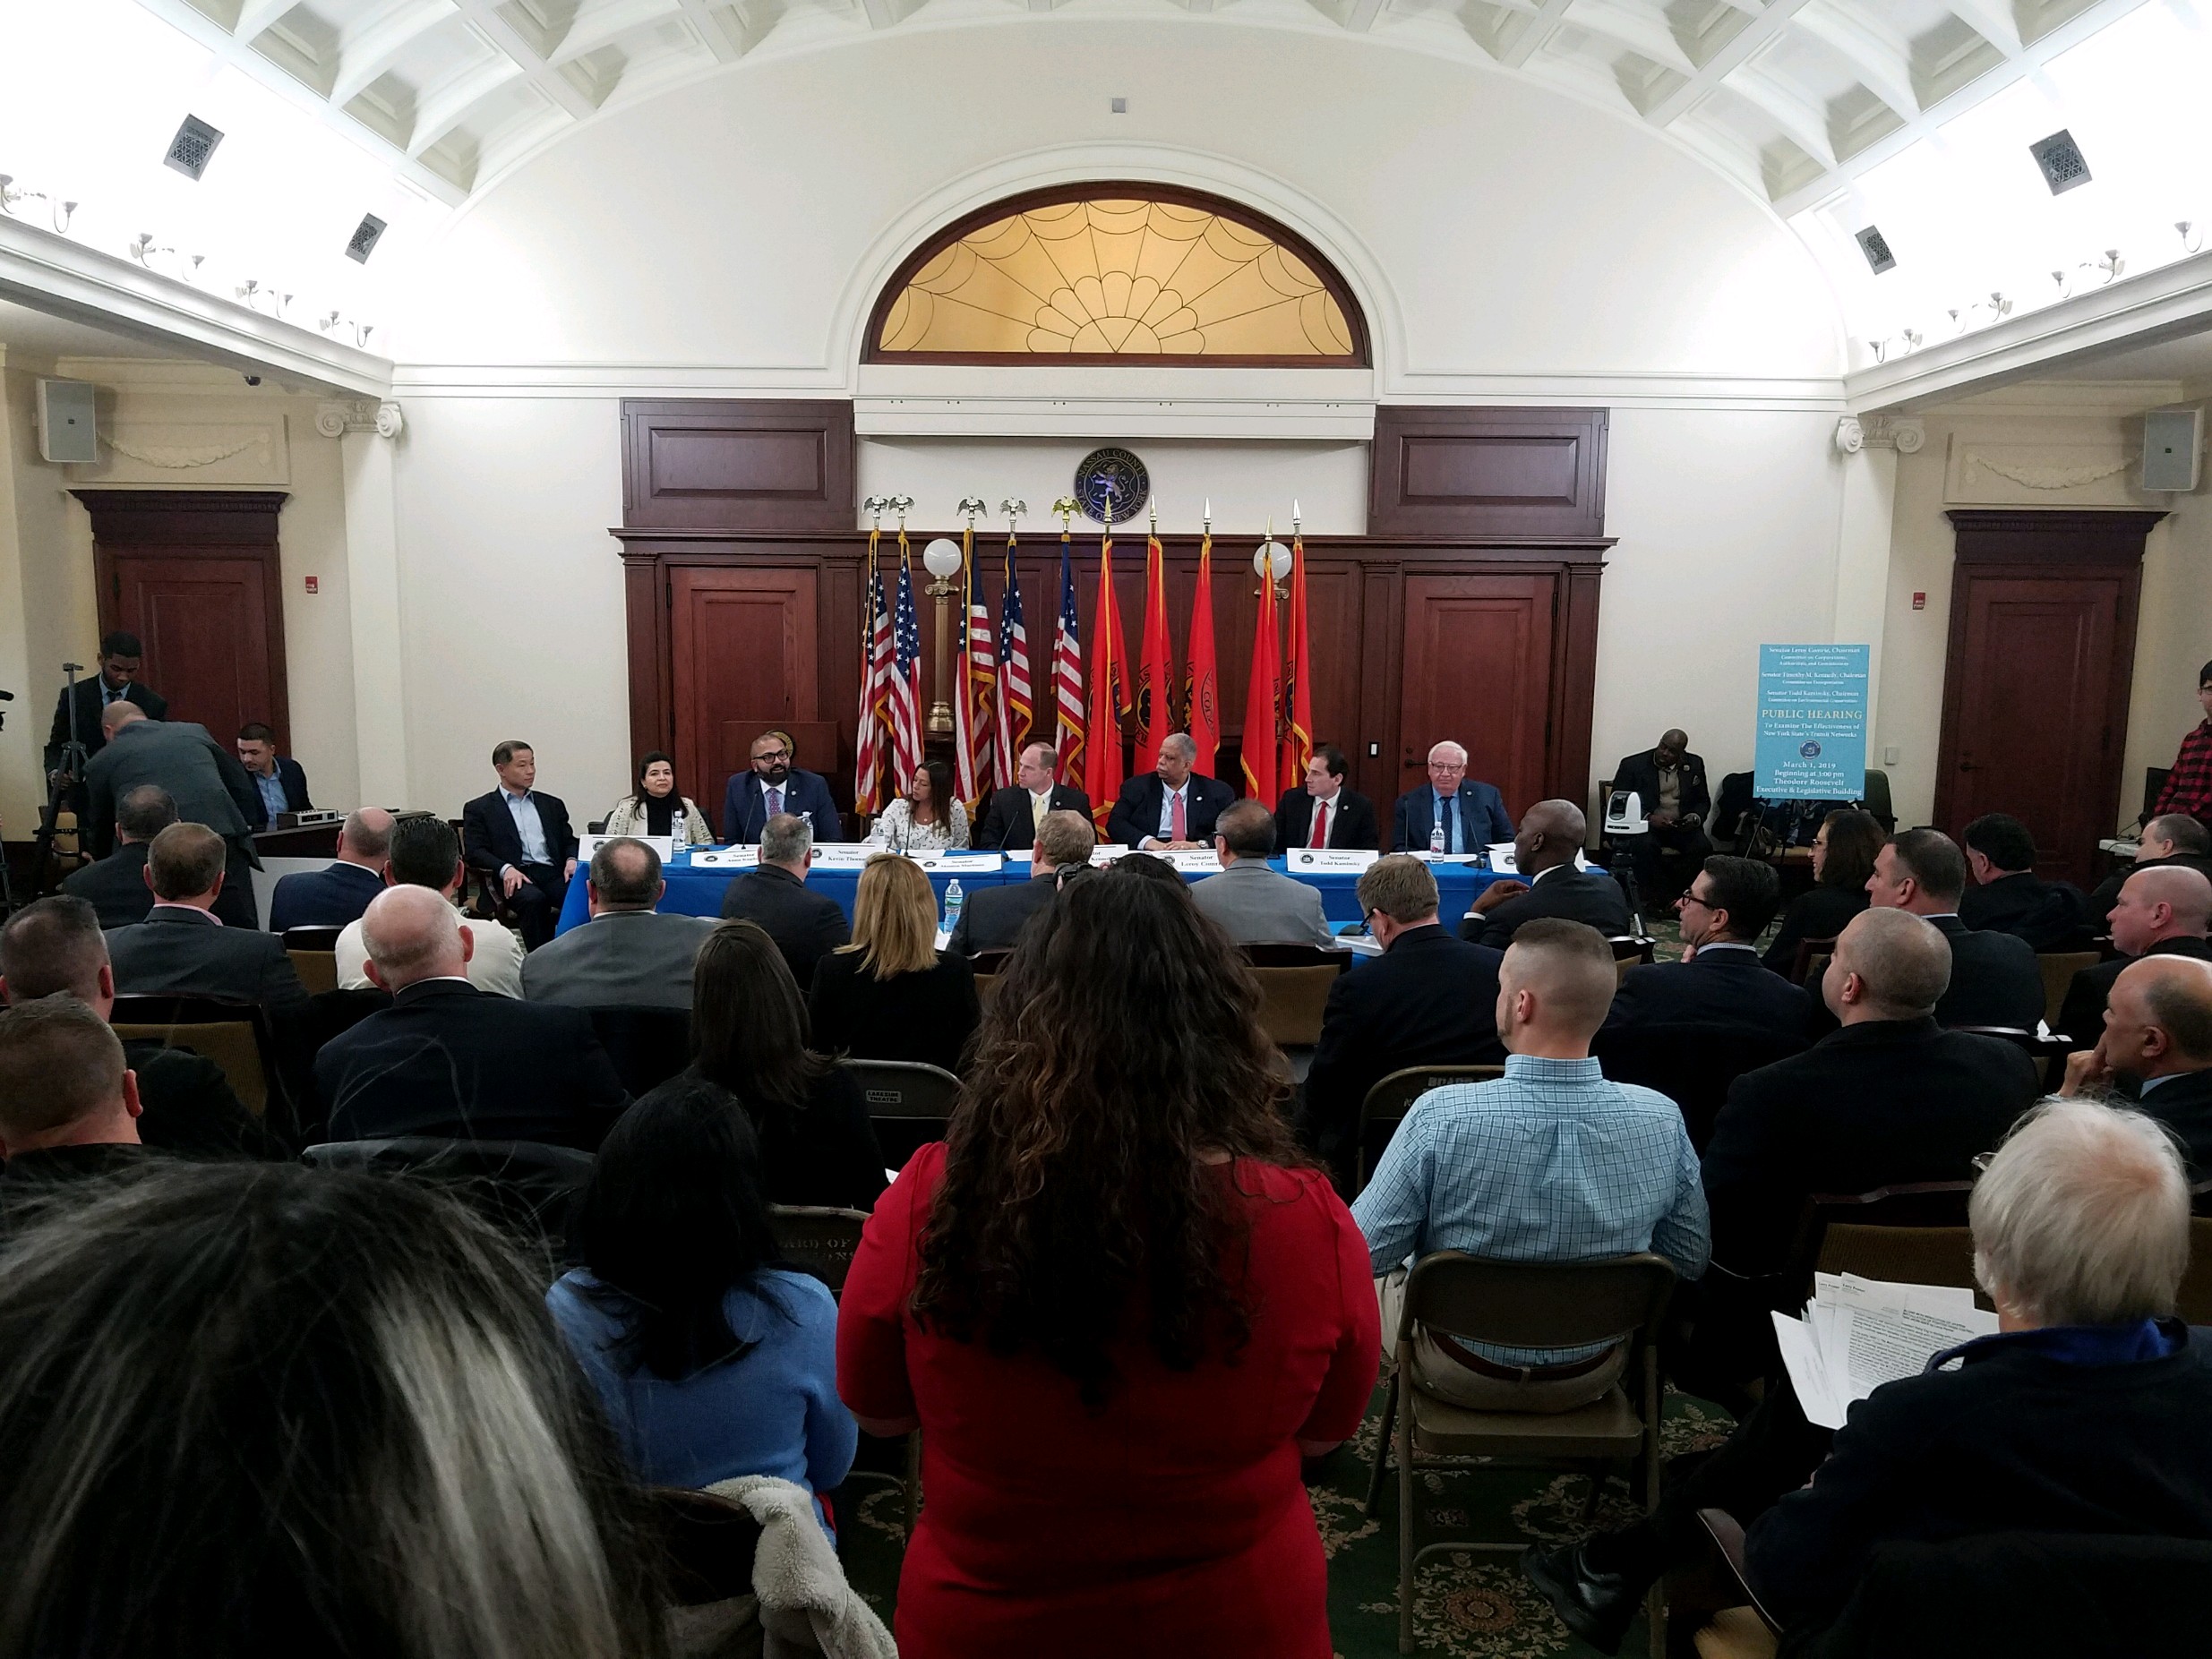 Officials, press and members of the public crowded a room in the Theodore Roosevelt Executive and Legislative Building in Mineola for a State Senate hearing on the LIRR last Friday. (Photo by Janelle Clausen)